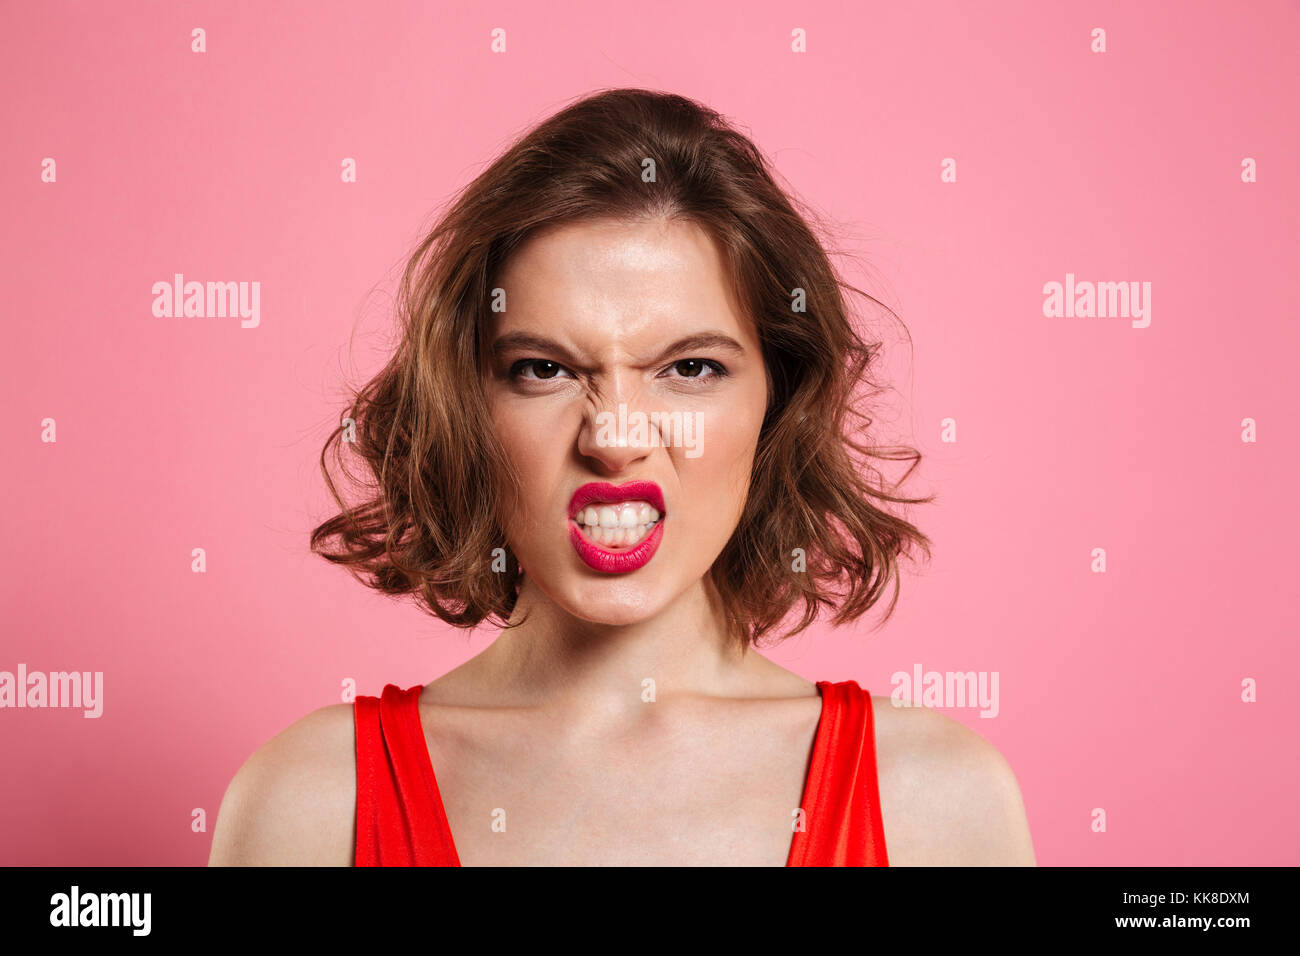 Close-up portrait of angry young woman with red lips looking at camera, isolé sur fond rose Banque D'Images